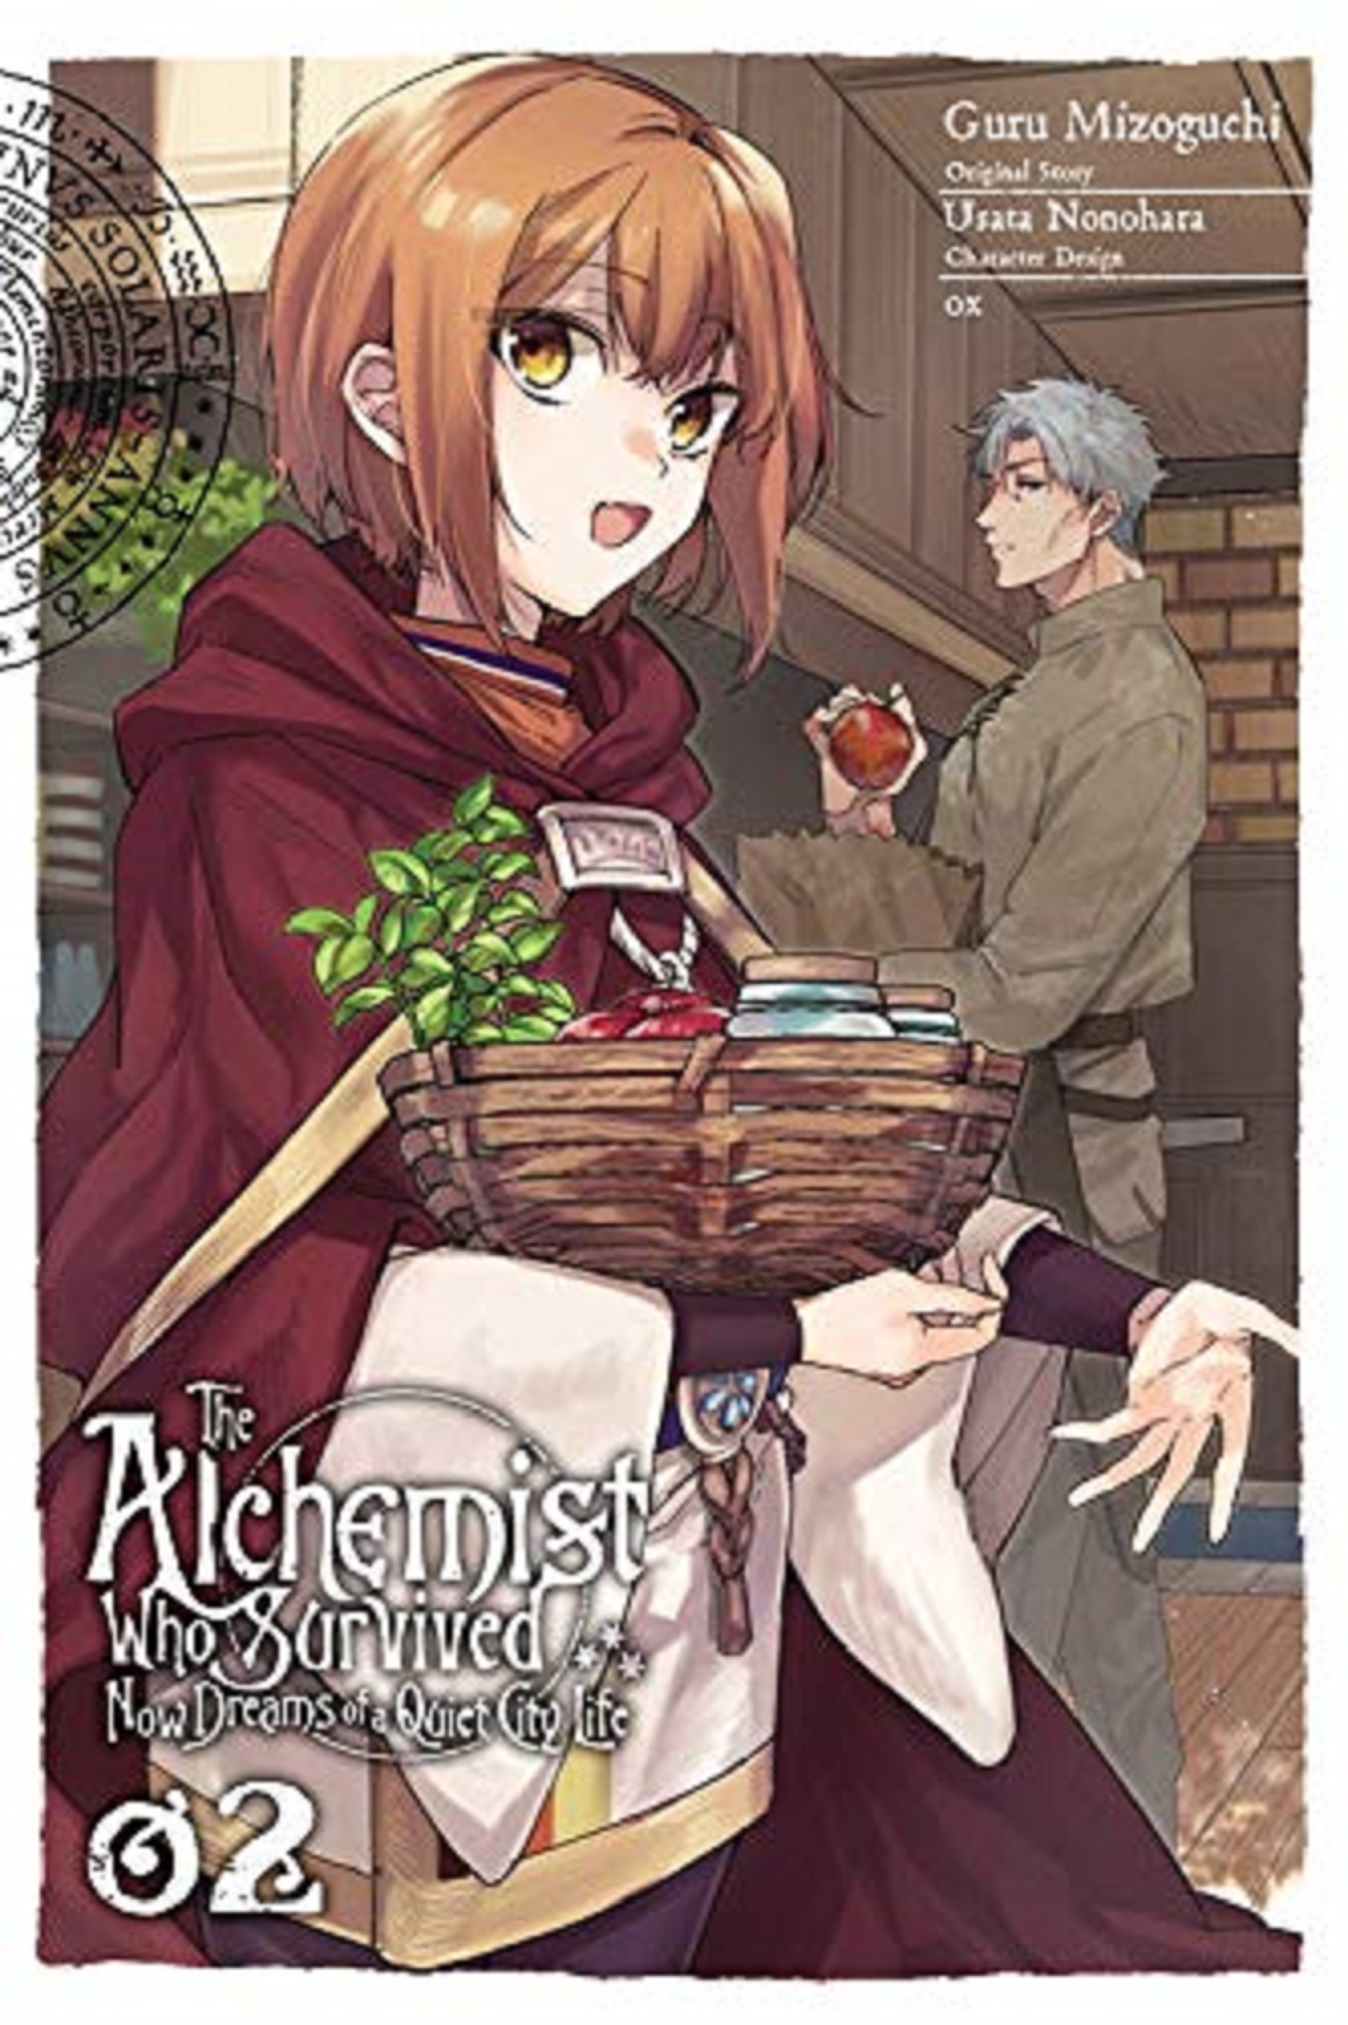 The Alchemist Who Survived Now Dreams of a Quiet City Life - Volume 2